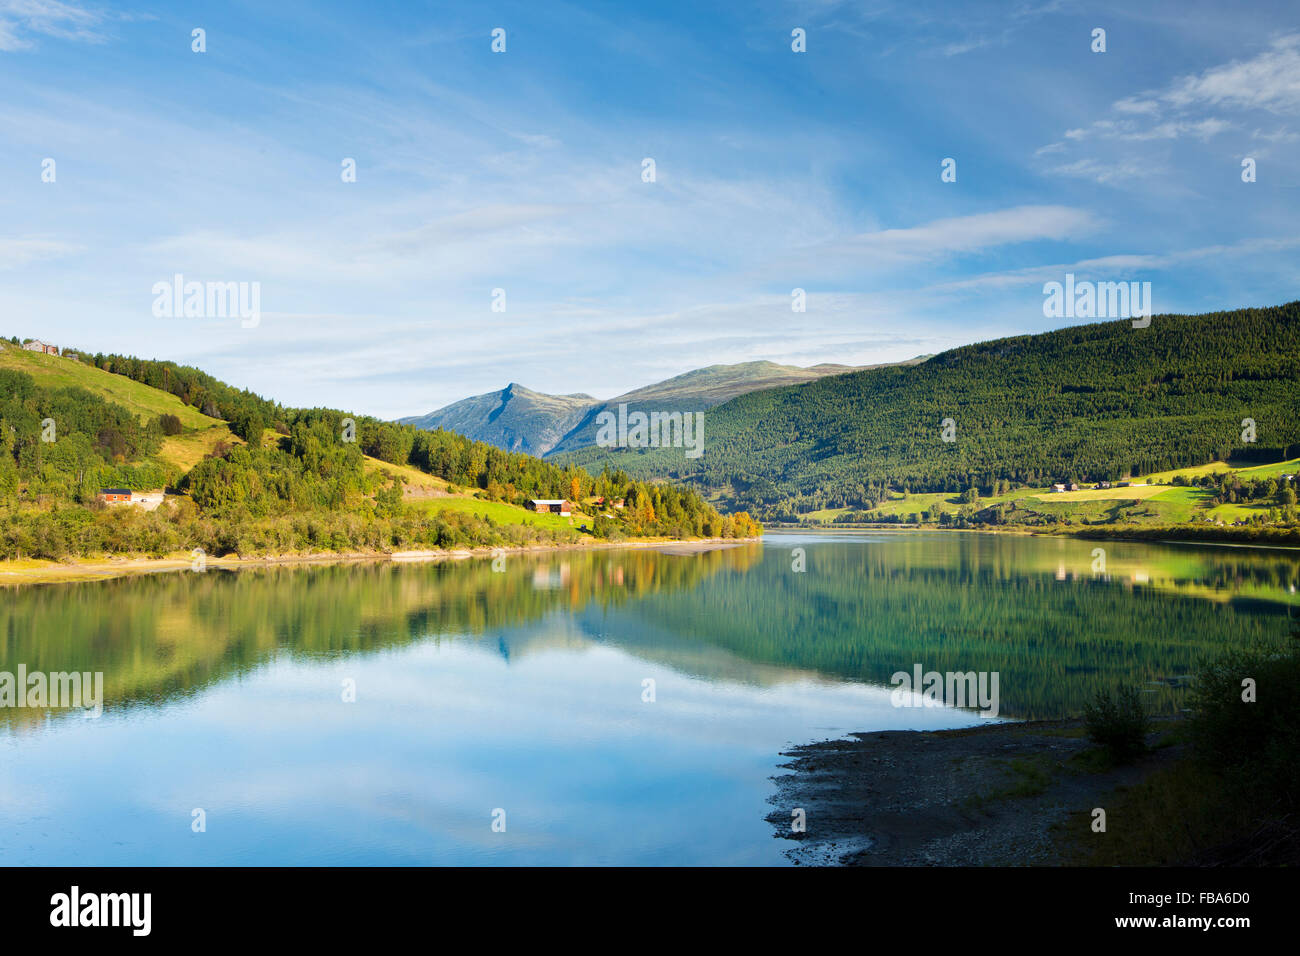 Norway, Gudbrandsdal, Lom, Vagavatnet, Scenic view of lake and forest Stock Photo